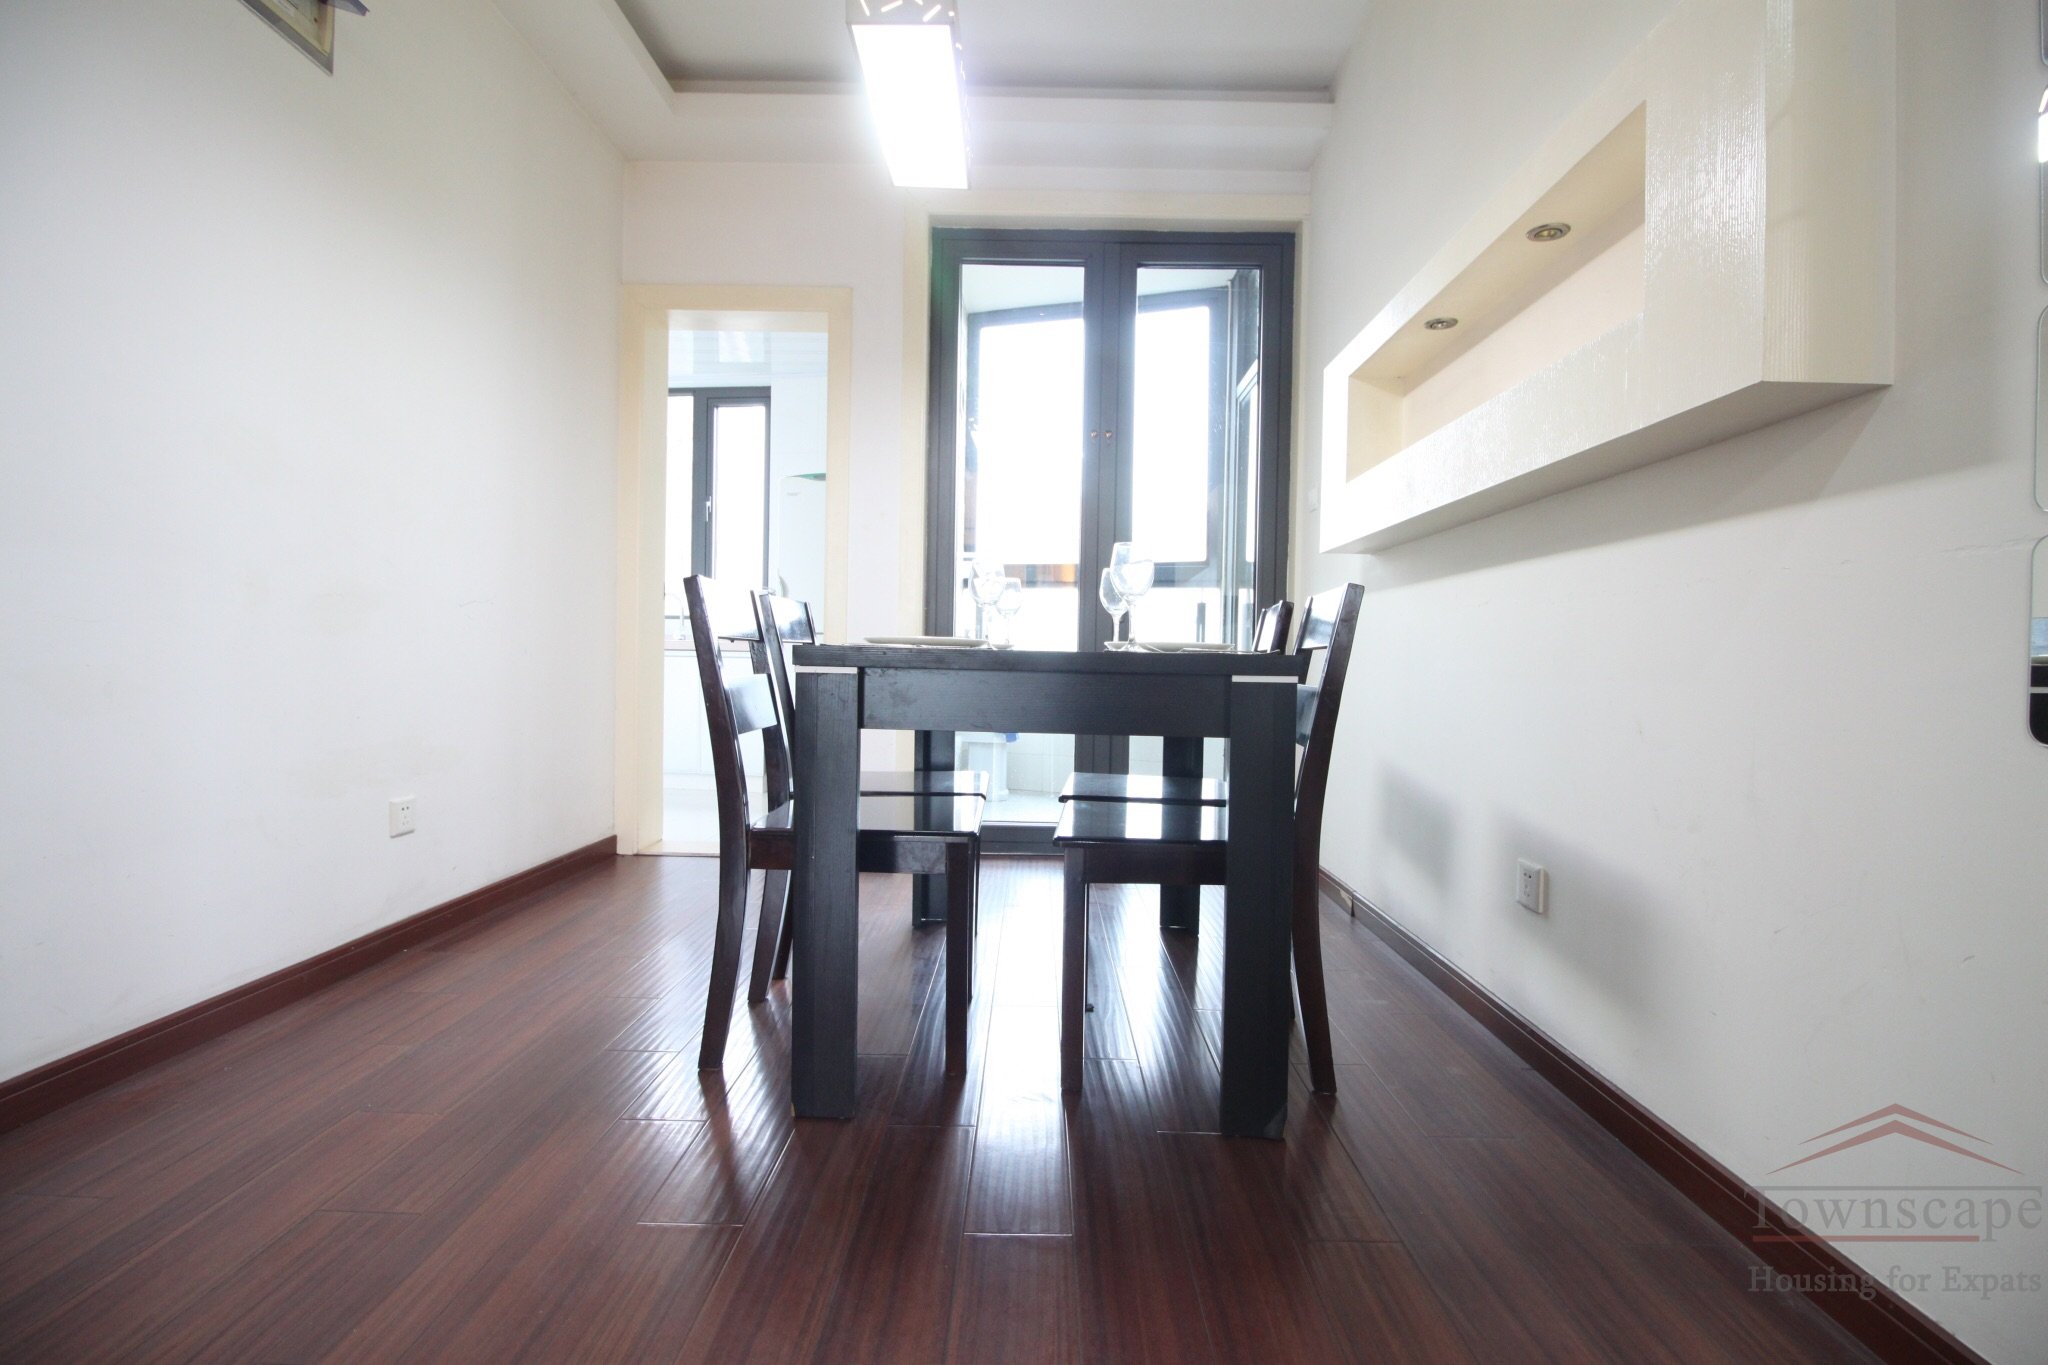 Lujiazui apartment for rent Sunny 3BR Apartment for rent in East Lujiazui, next to Metro station Minsheng Road, Line 6